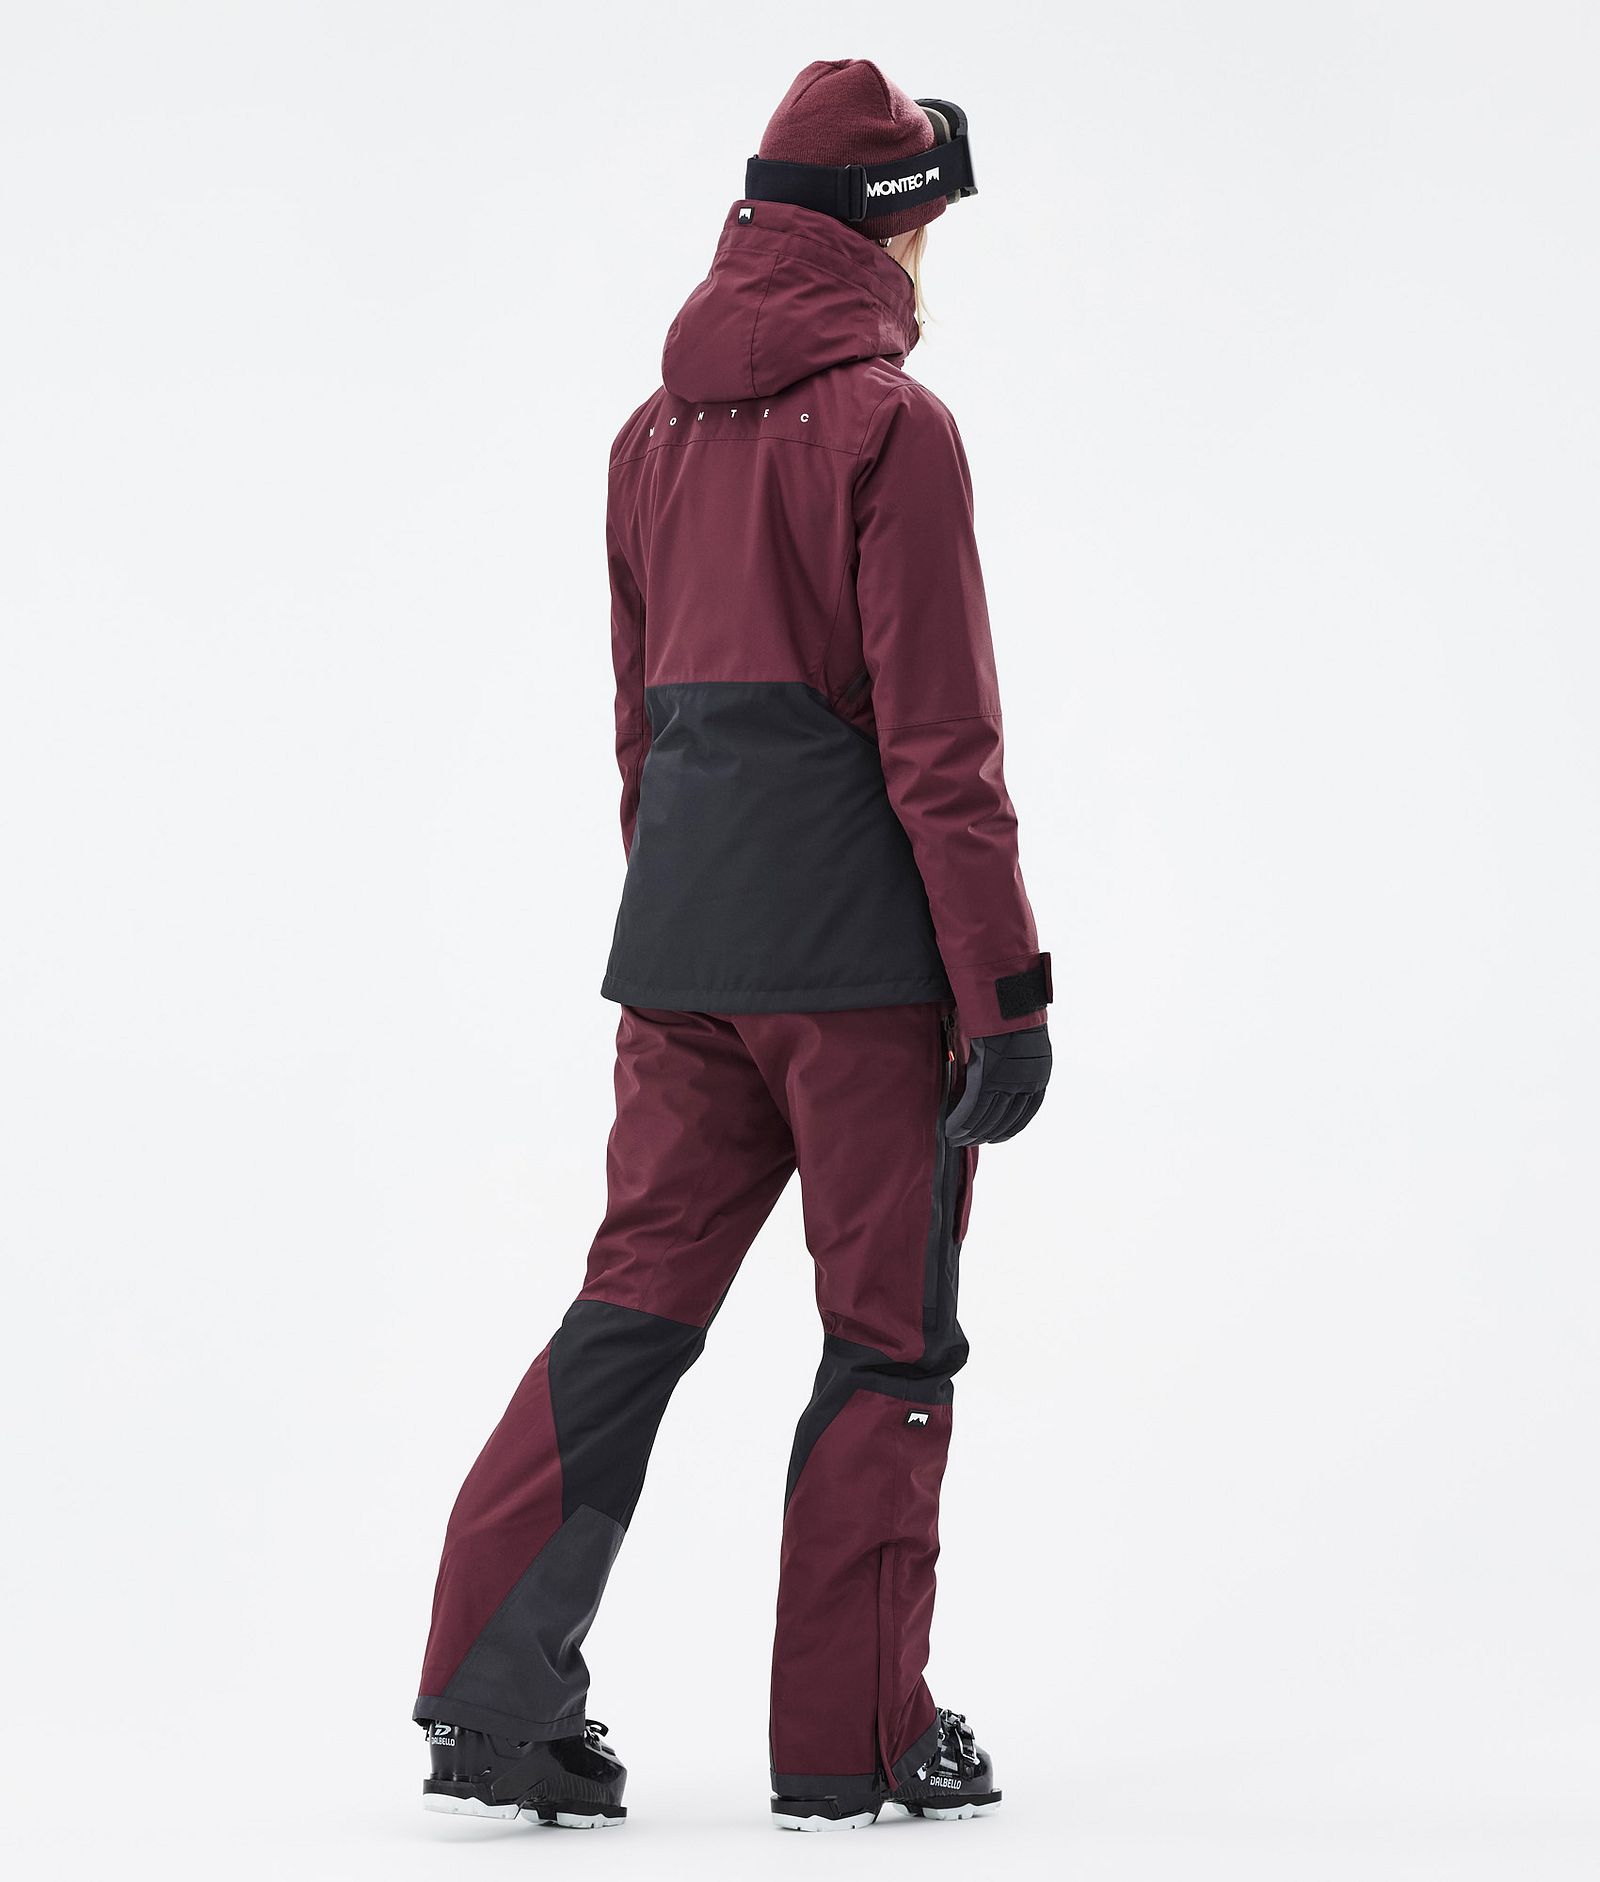 Montec Moss W Outfit Sci Donna Burgundy/Black